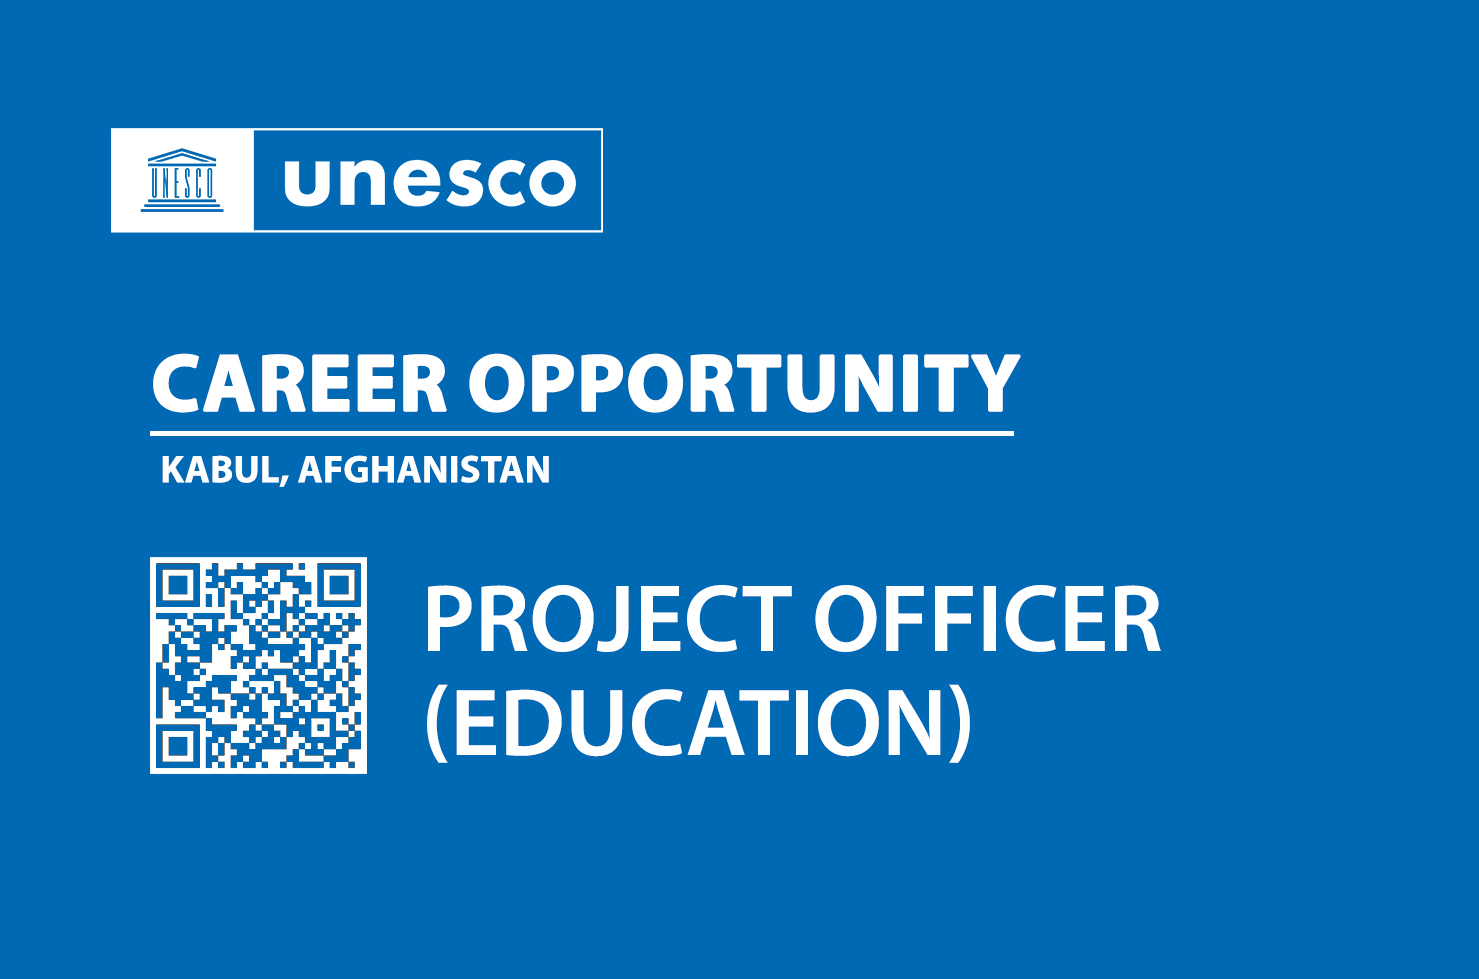 Career Opportunity: Project Officer (Education)